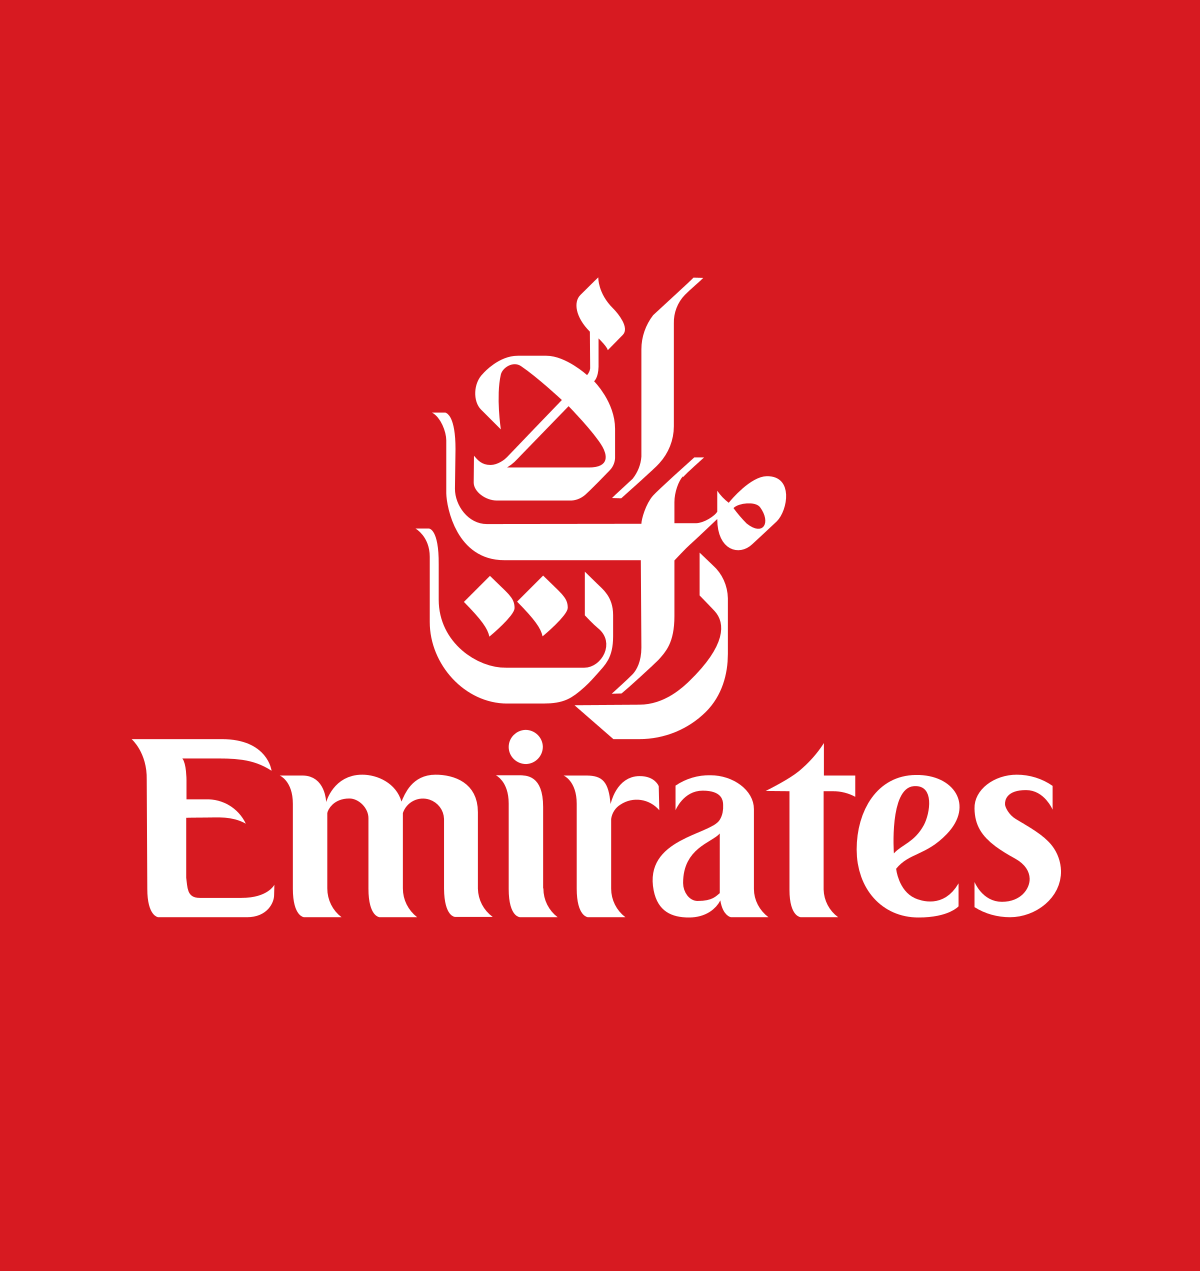 Country Airline Logo - Emirates (airline)